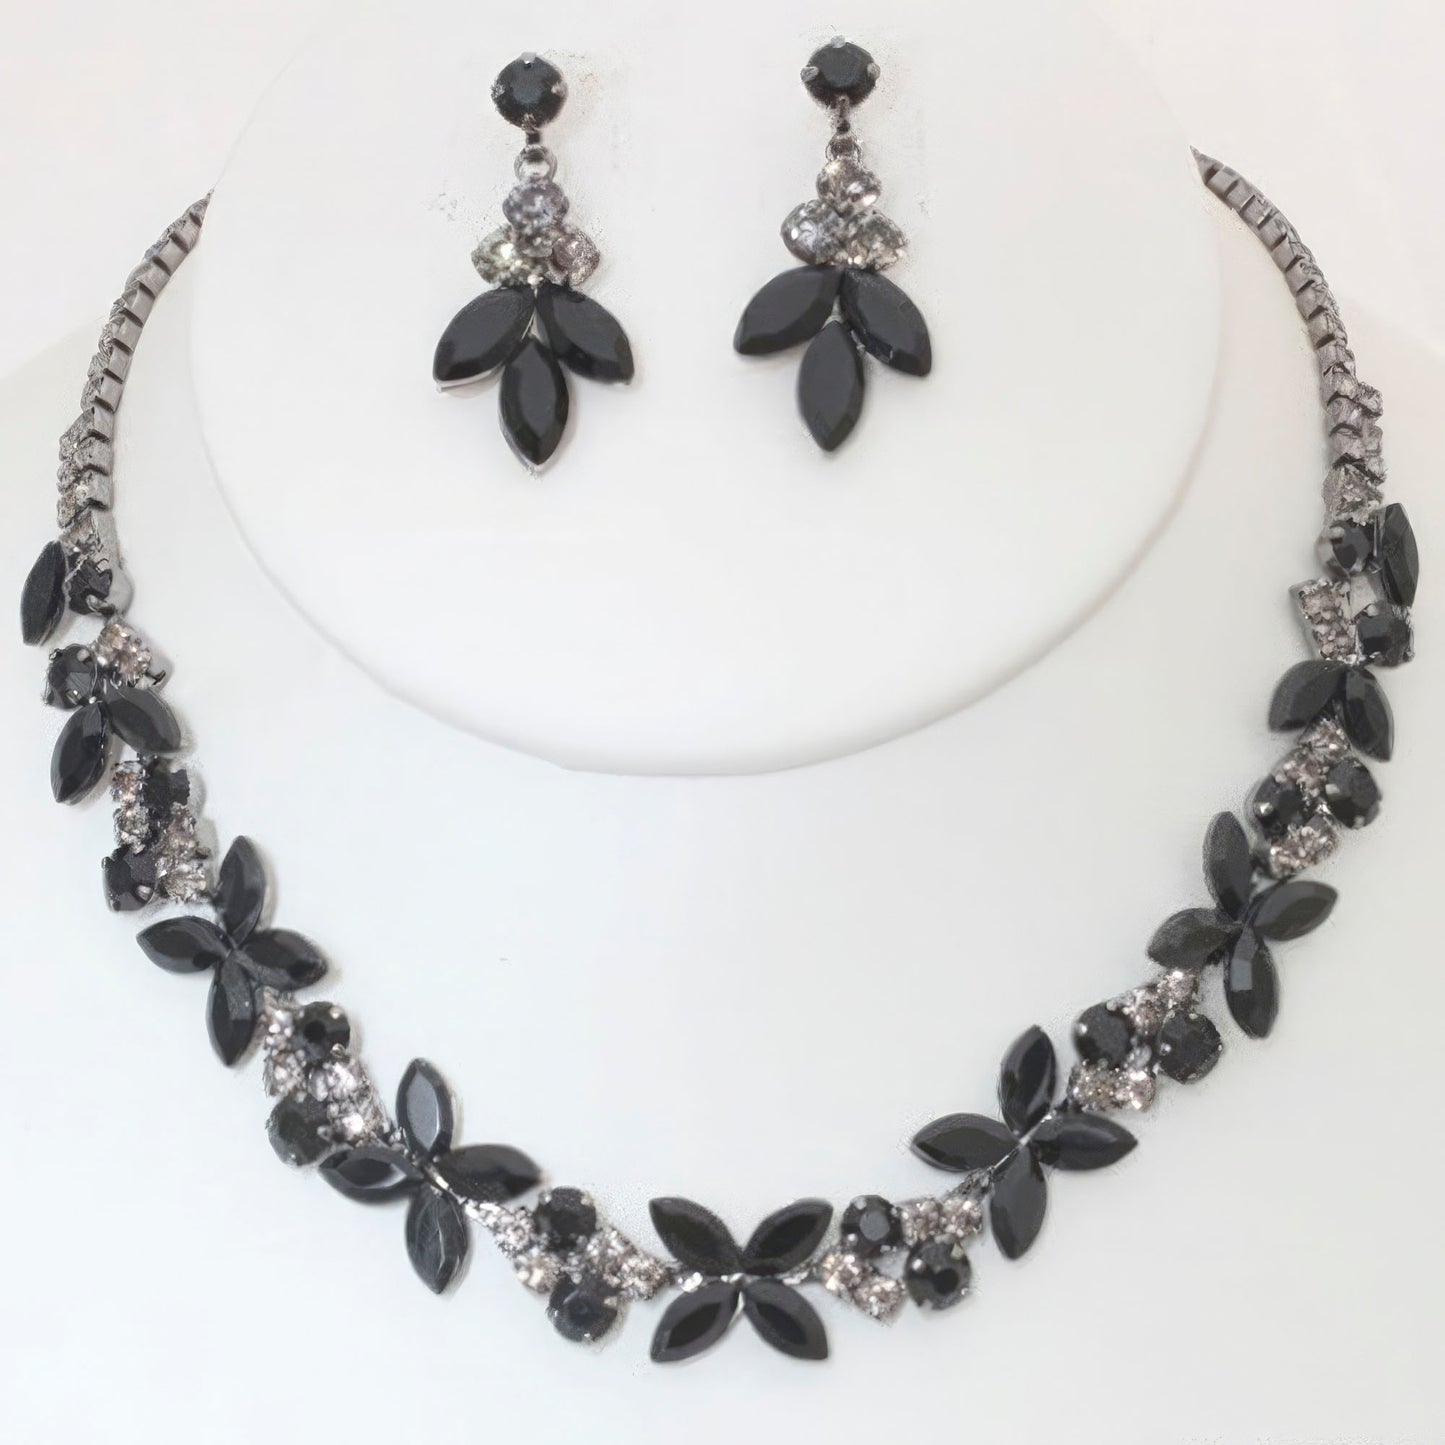 Rhinestone Crystal Necklace And Earring Set